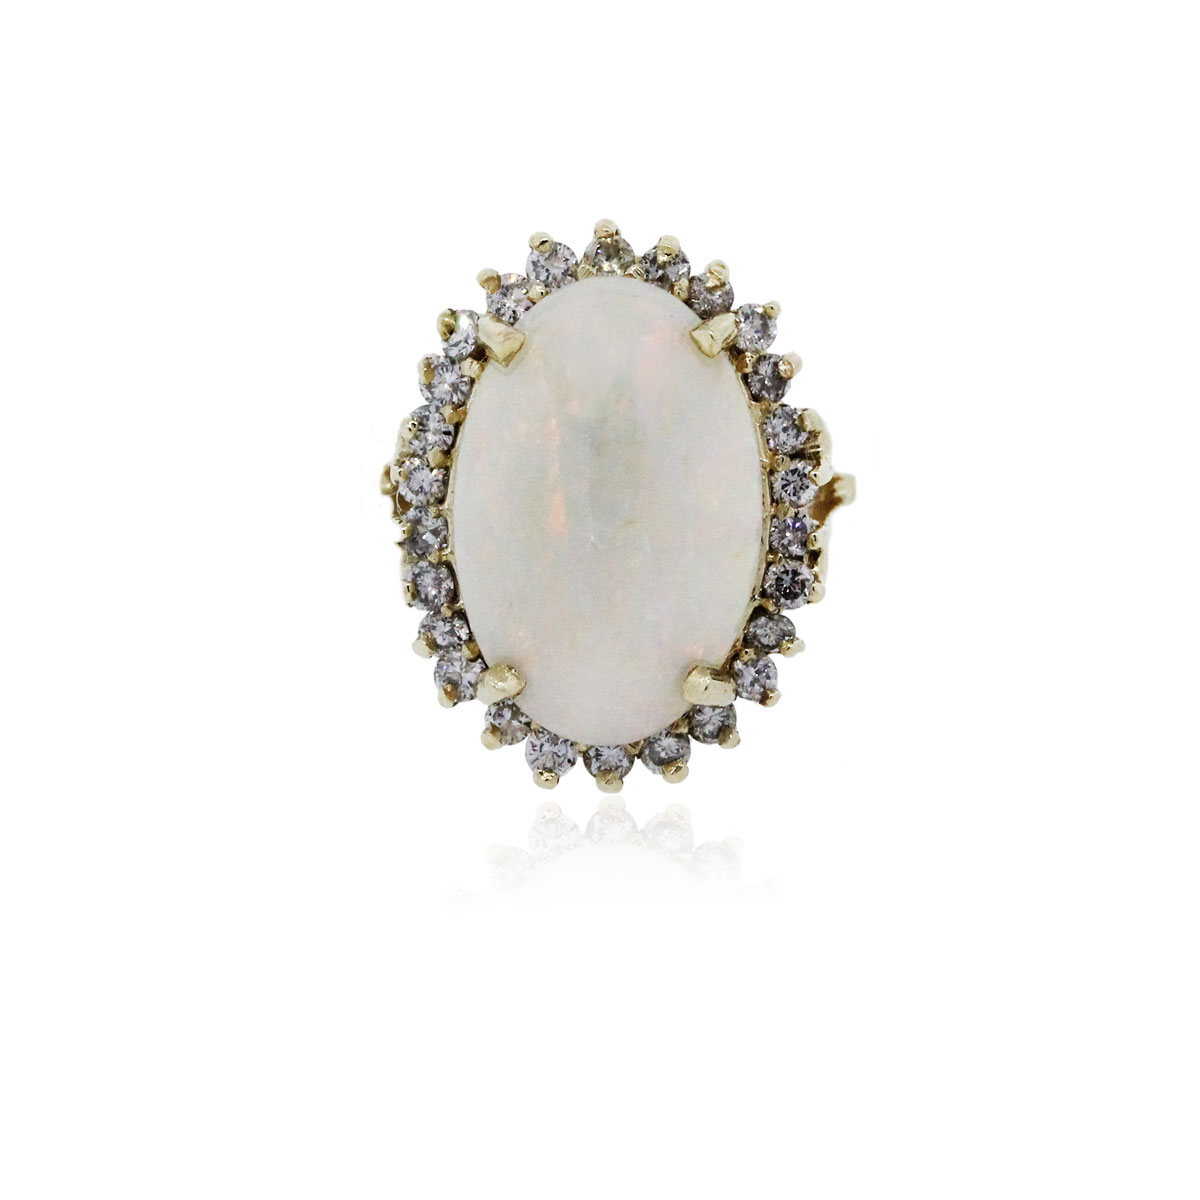 You are viewing this 14k Yellow Gold Diamond Oval Opal Ring!